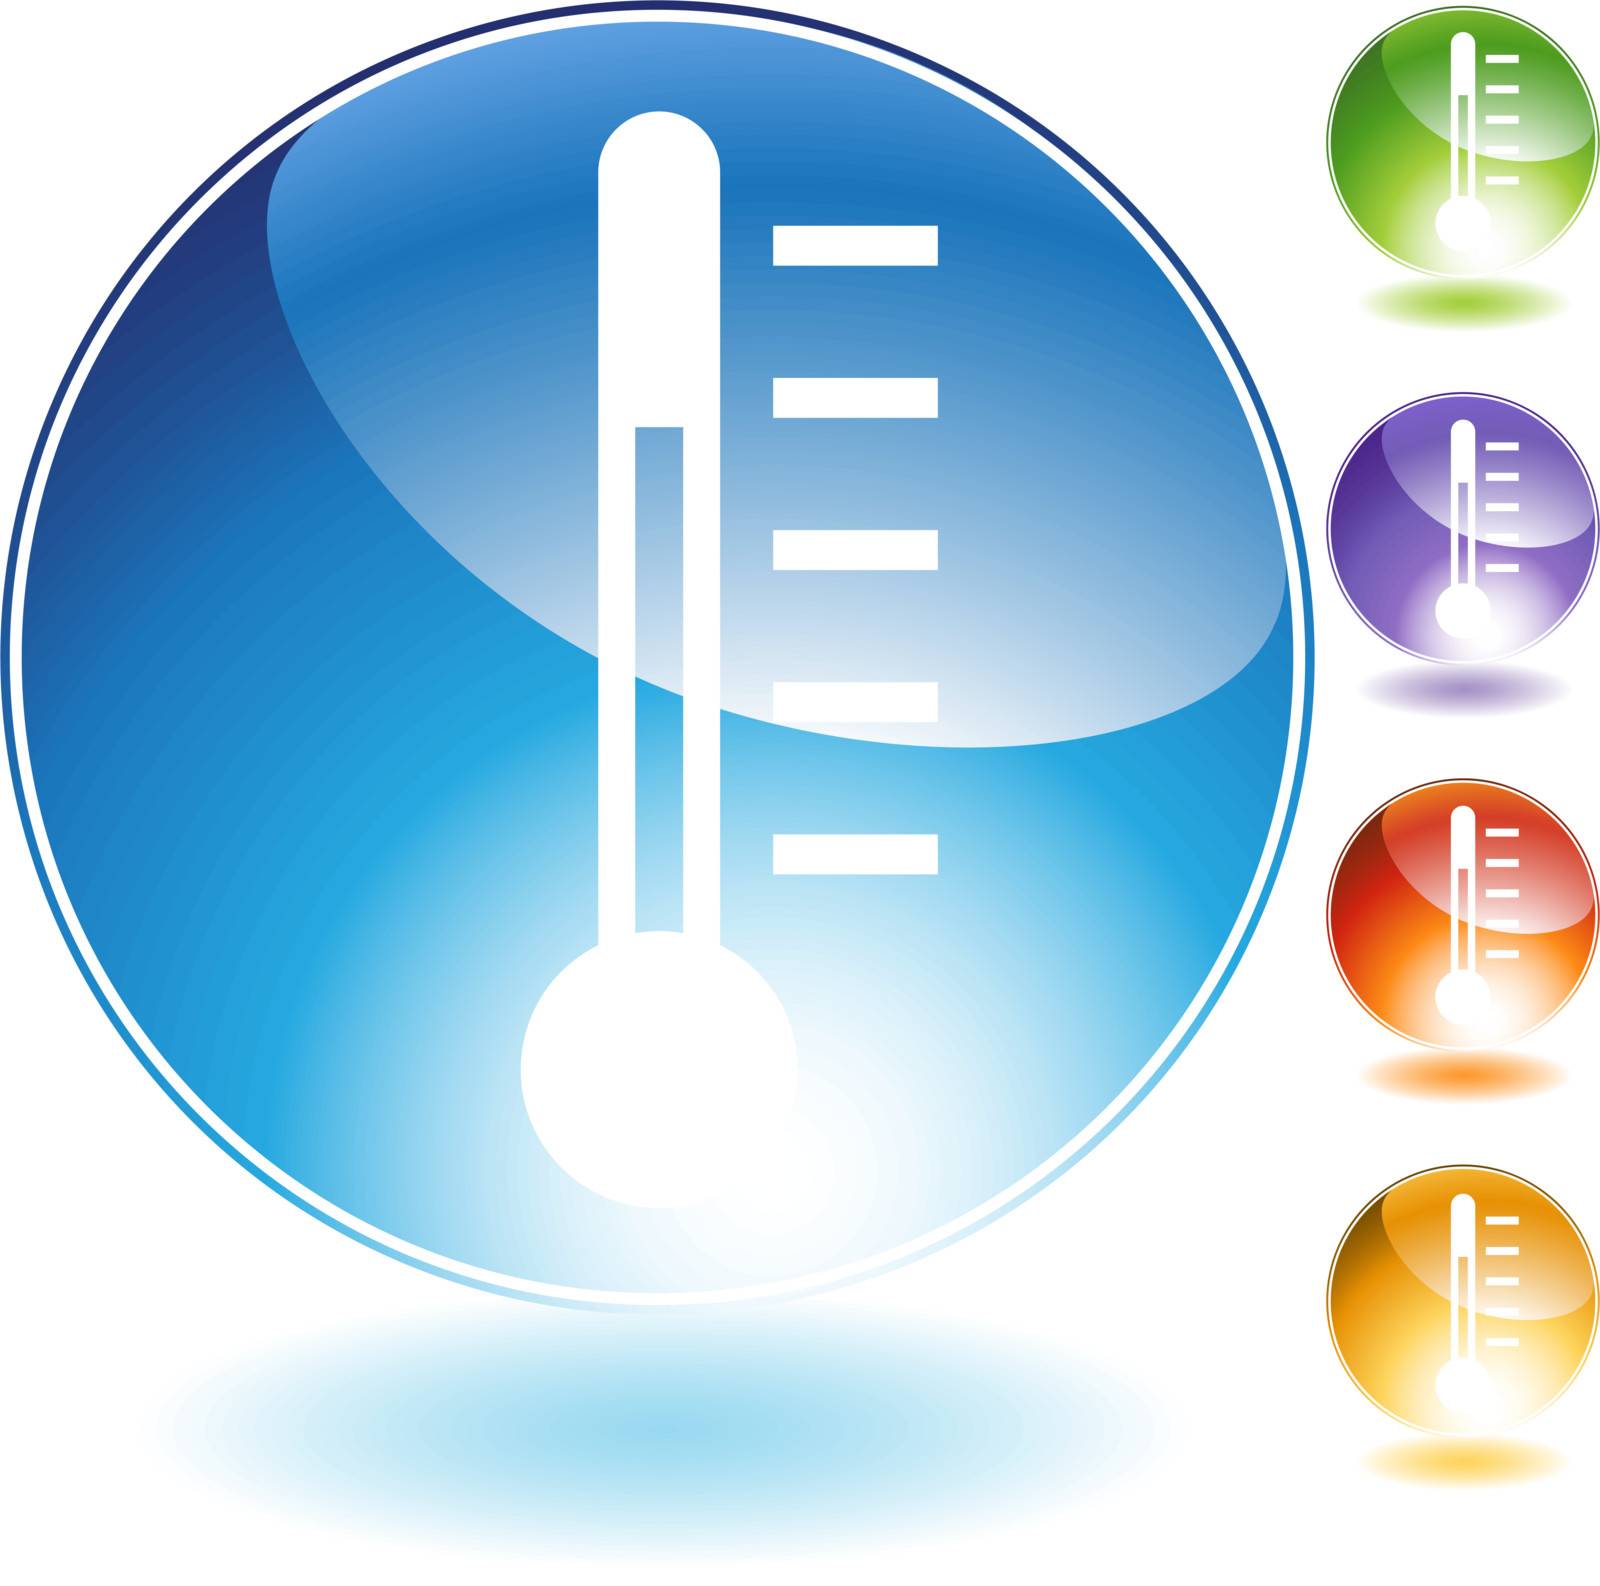 An image of a thermometer